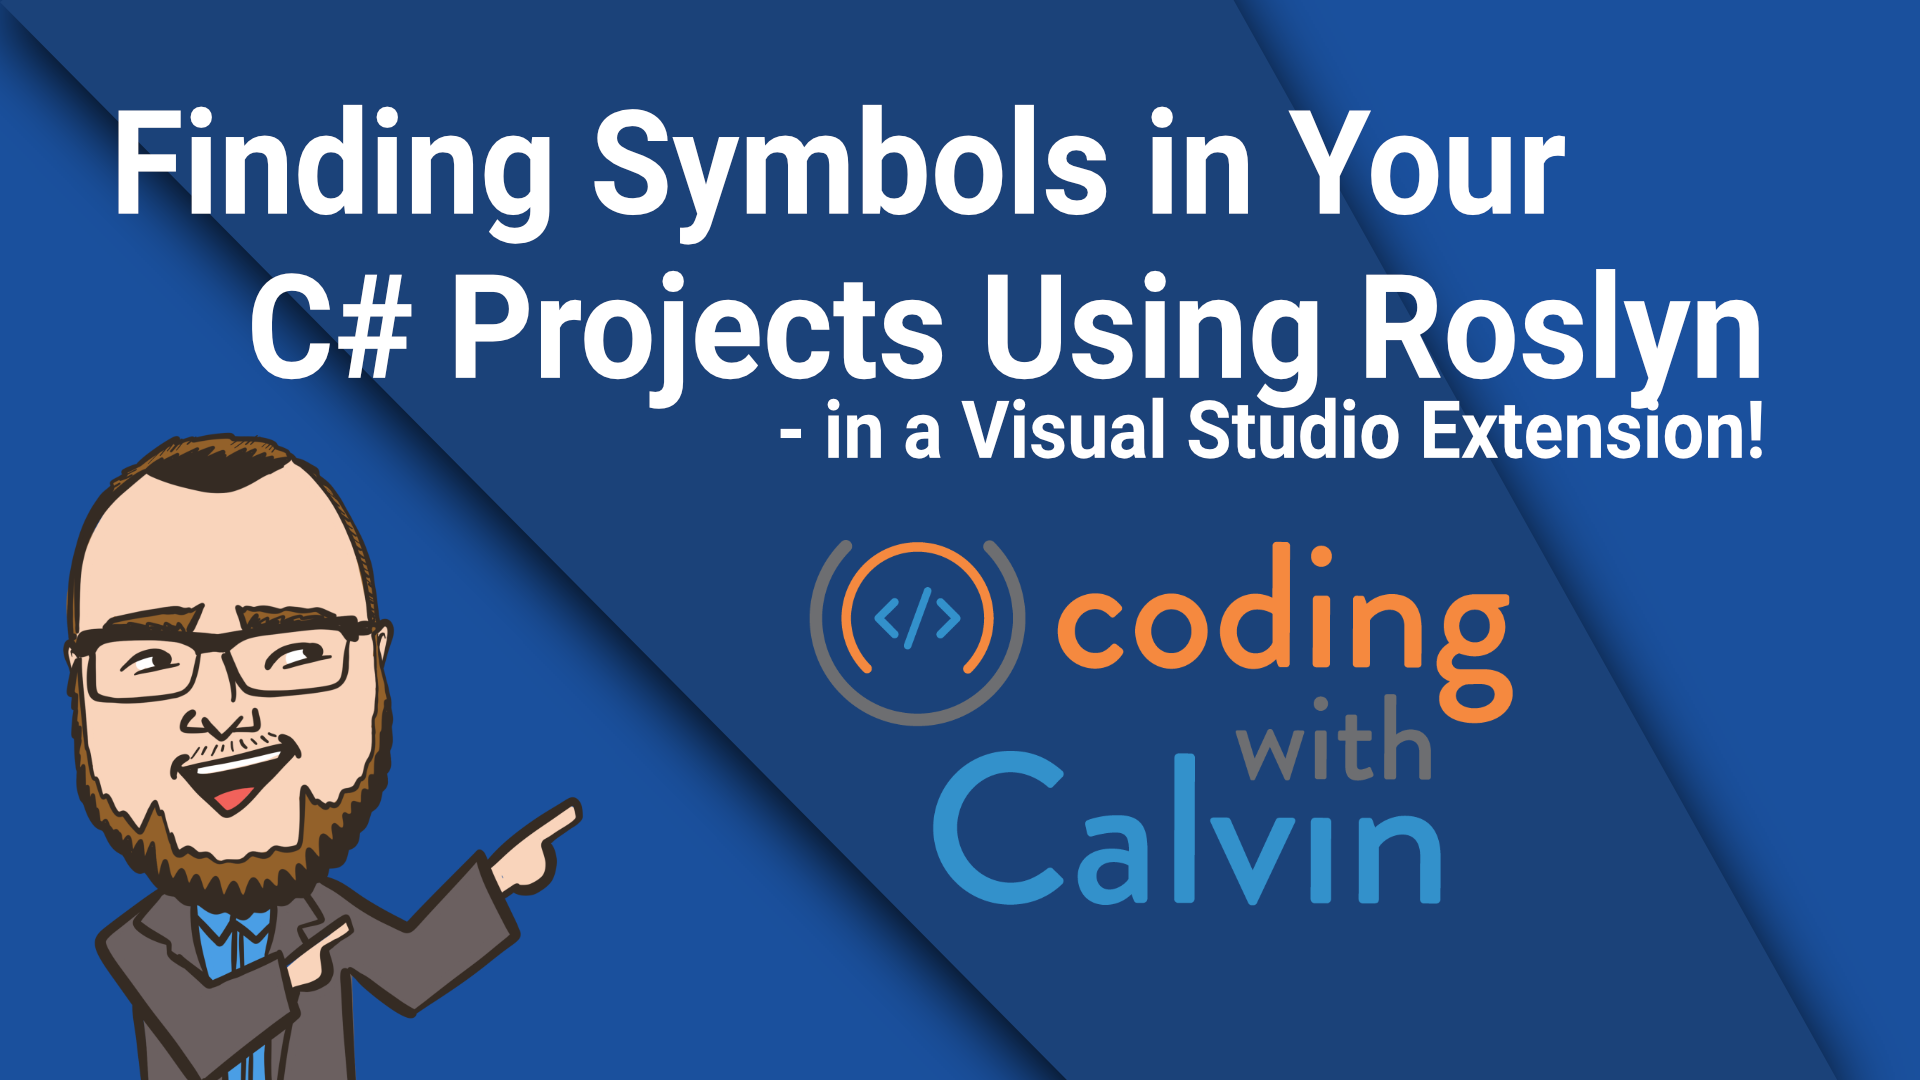 Finding Symbols in Your C# Projects Using Roslyn